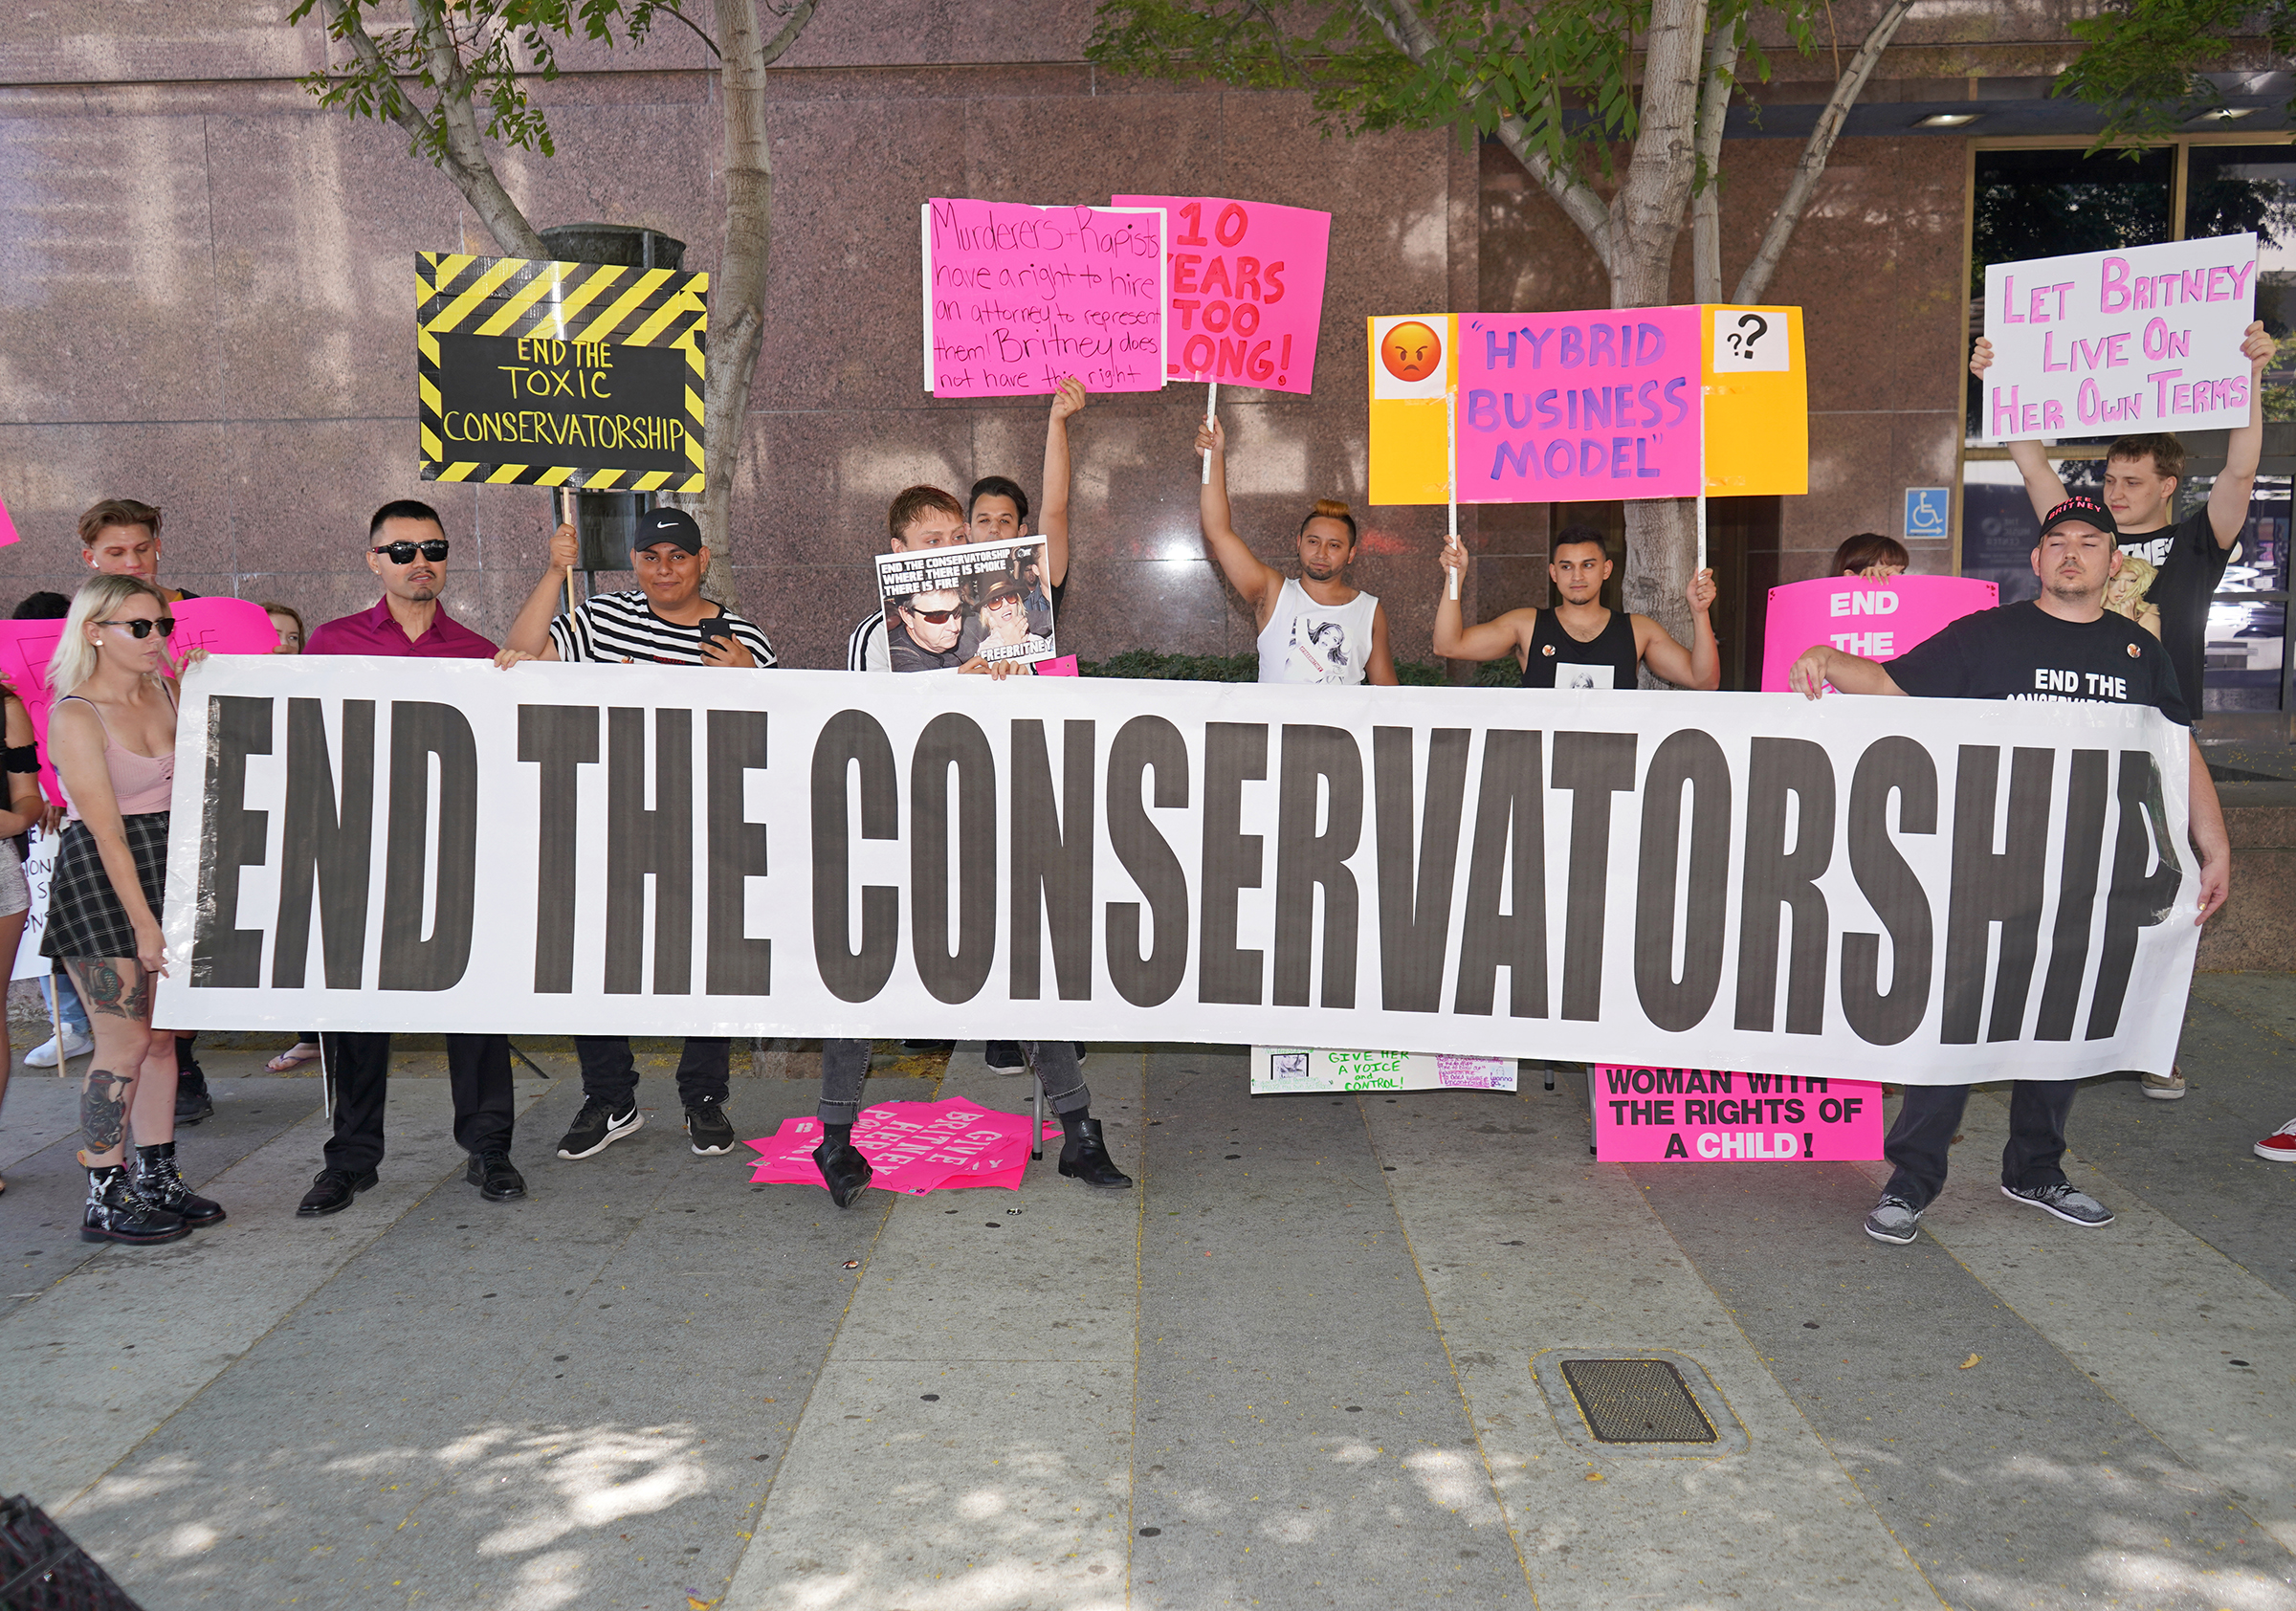 Protesters hold a banner outside a conservatorship hearing in September 2019. (Jamie Lee Curtis Taete)